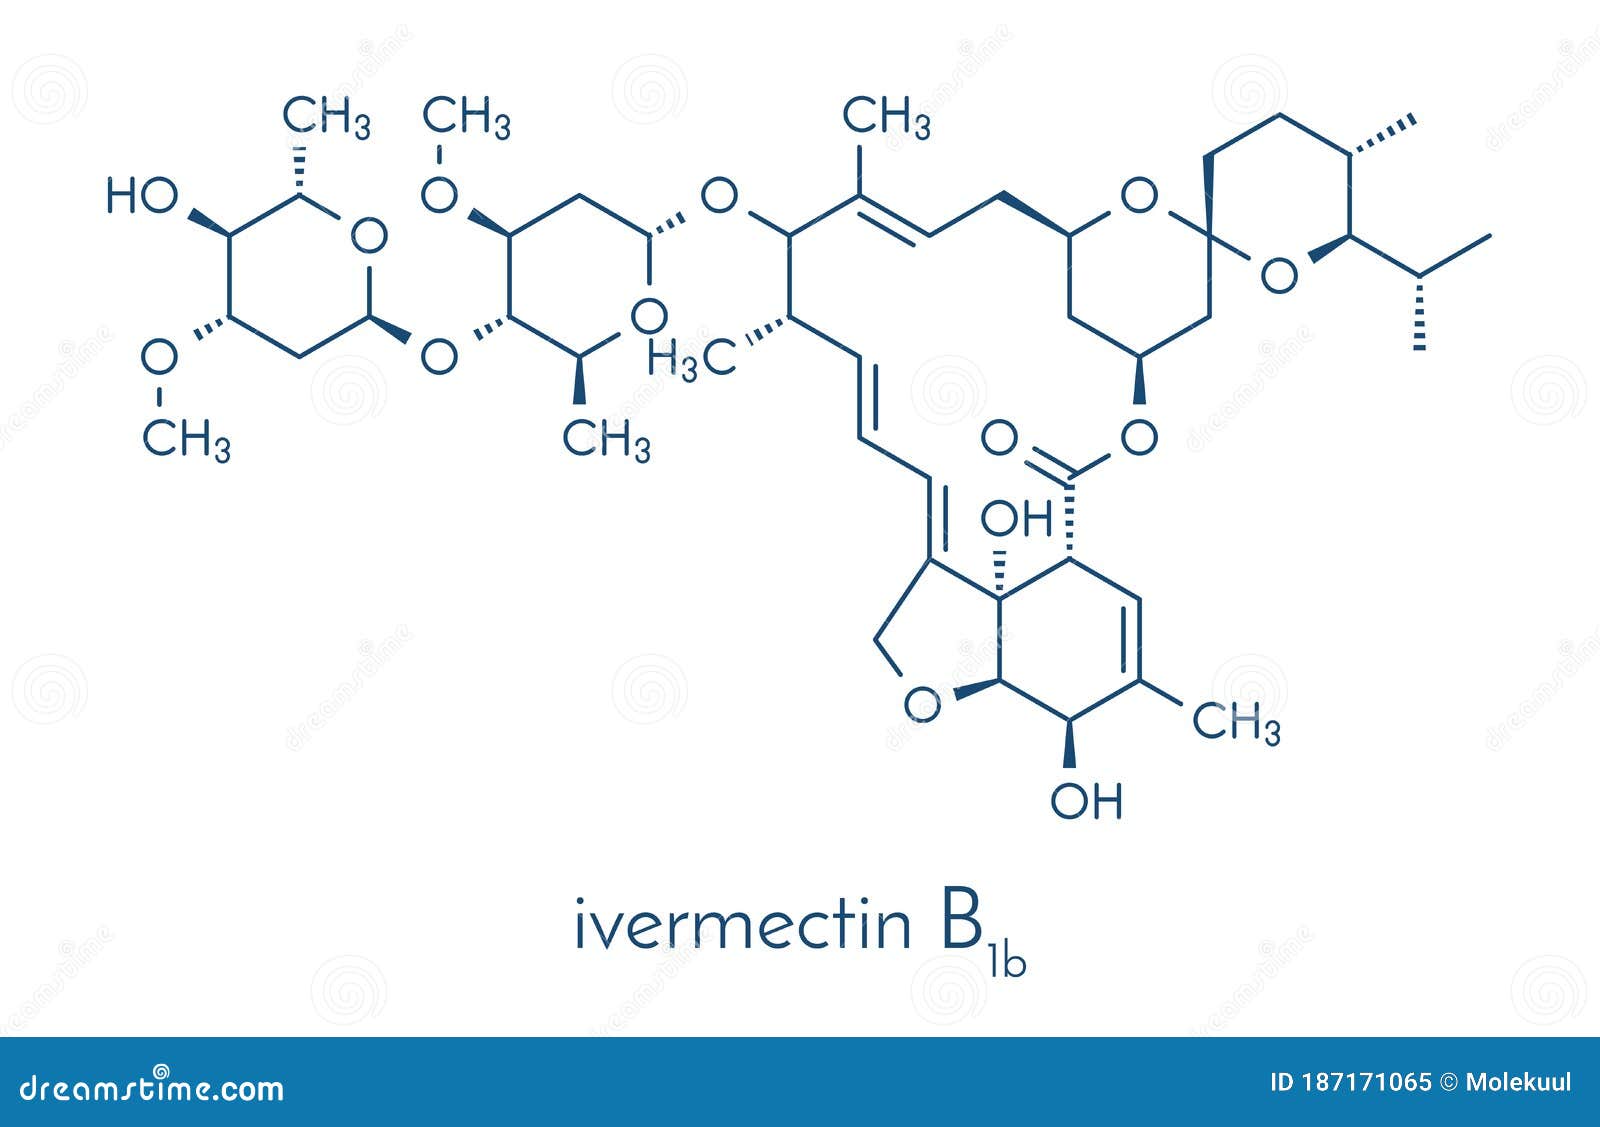 ivermectin antiparasitic drug molecule. used in treatment of river blindness, scabies, head lice, etc. skeletal formula.